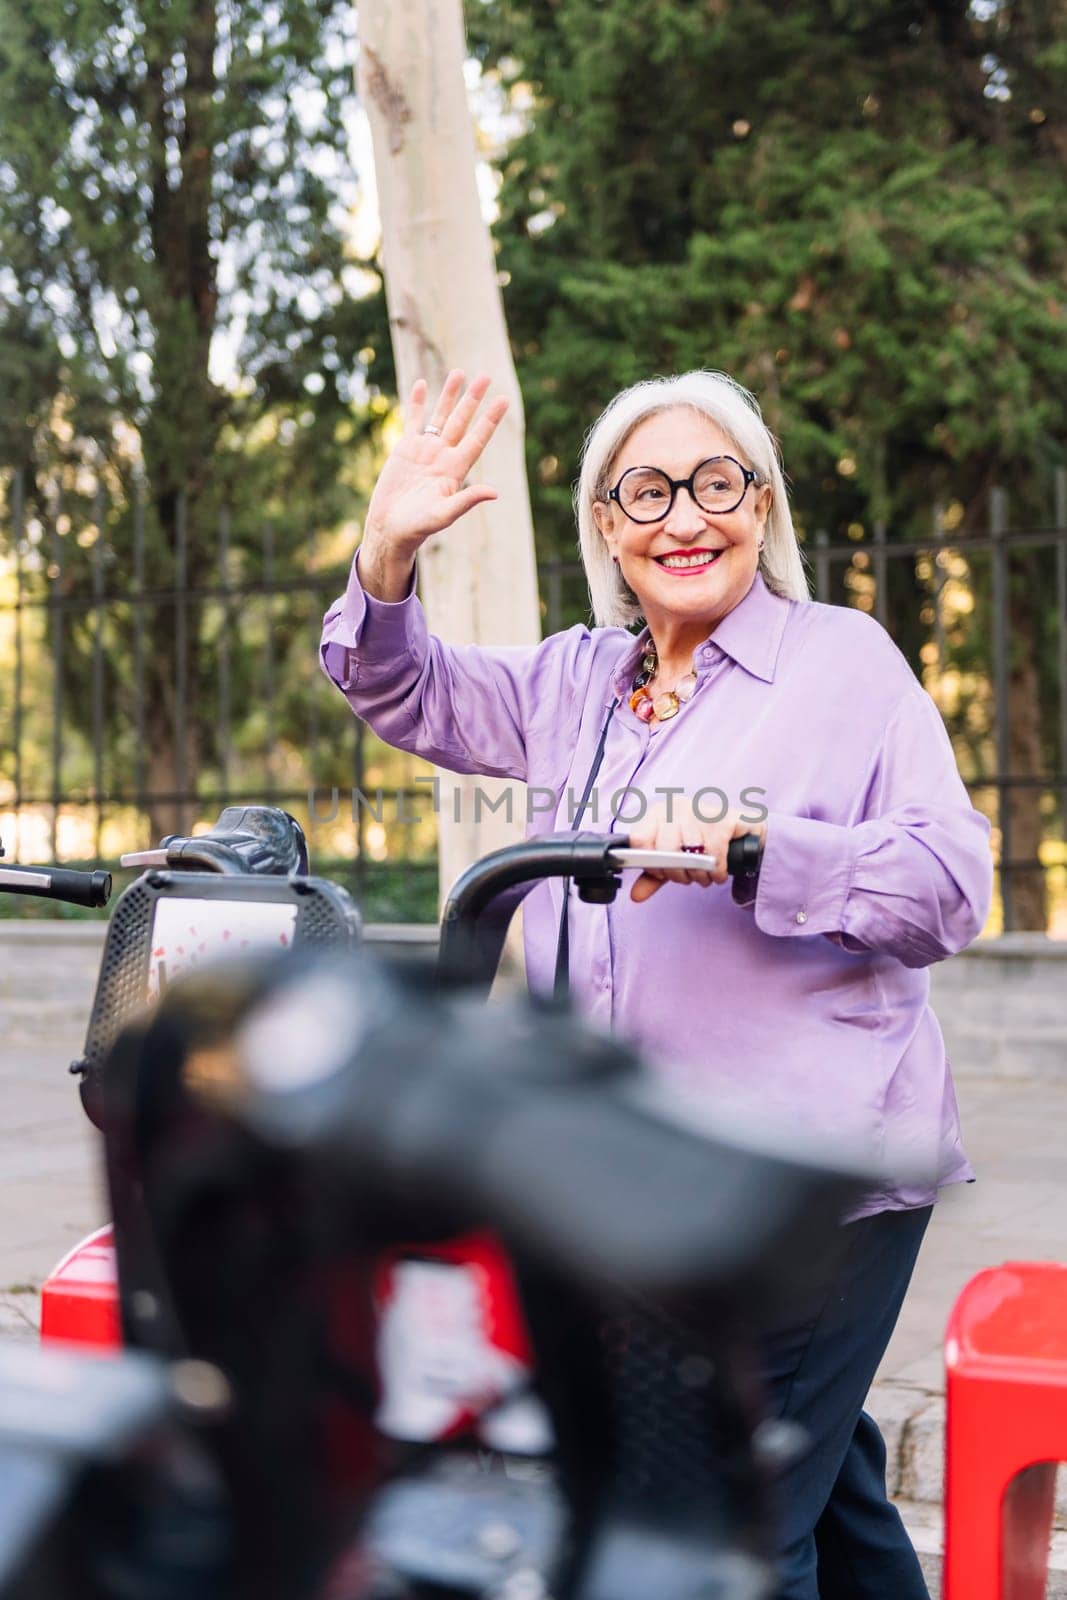 smiling senior woman greeting with hand while grabbing a rental bike from the parking row, concept of sustainable mobility and active lifestyle in elderly people